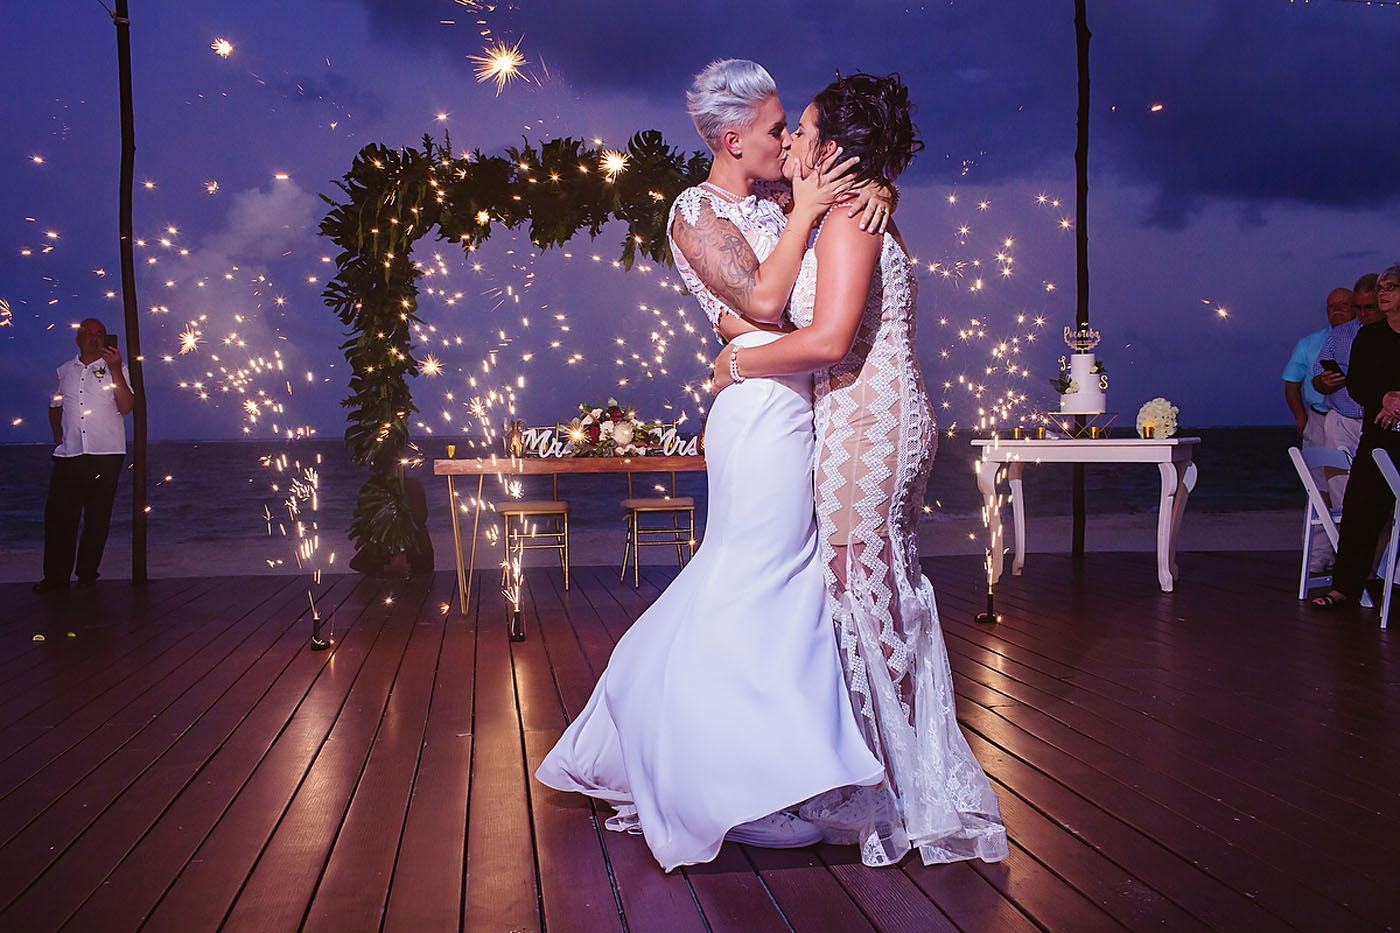 A destination wedding in Mexico with cold fireworks and an LED neon drum show